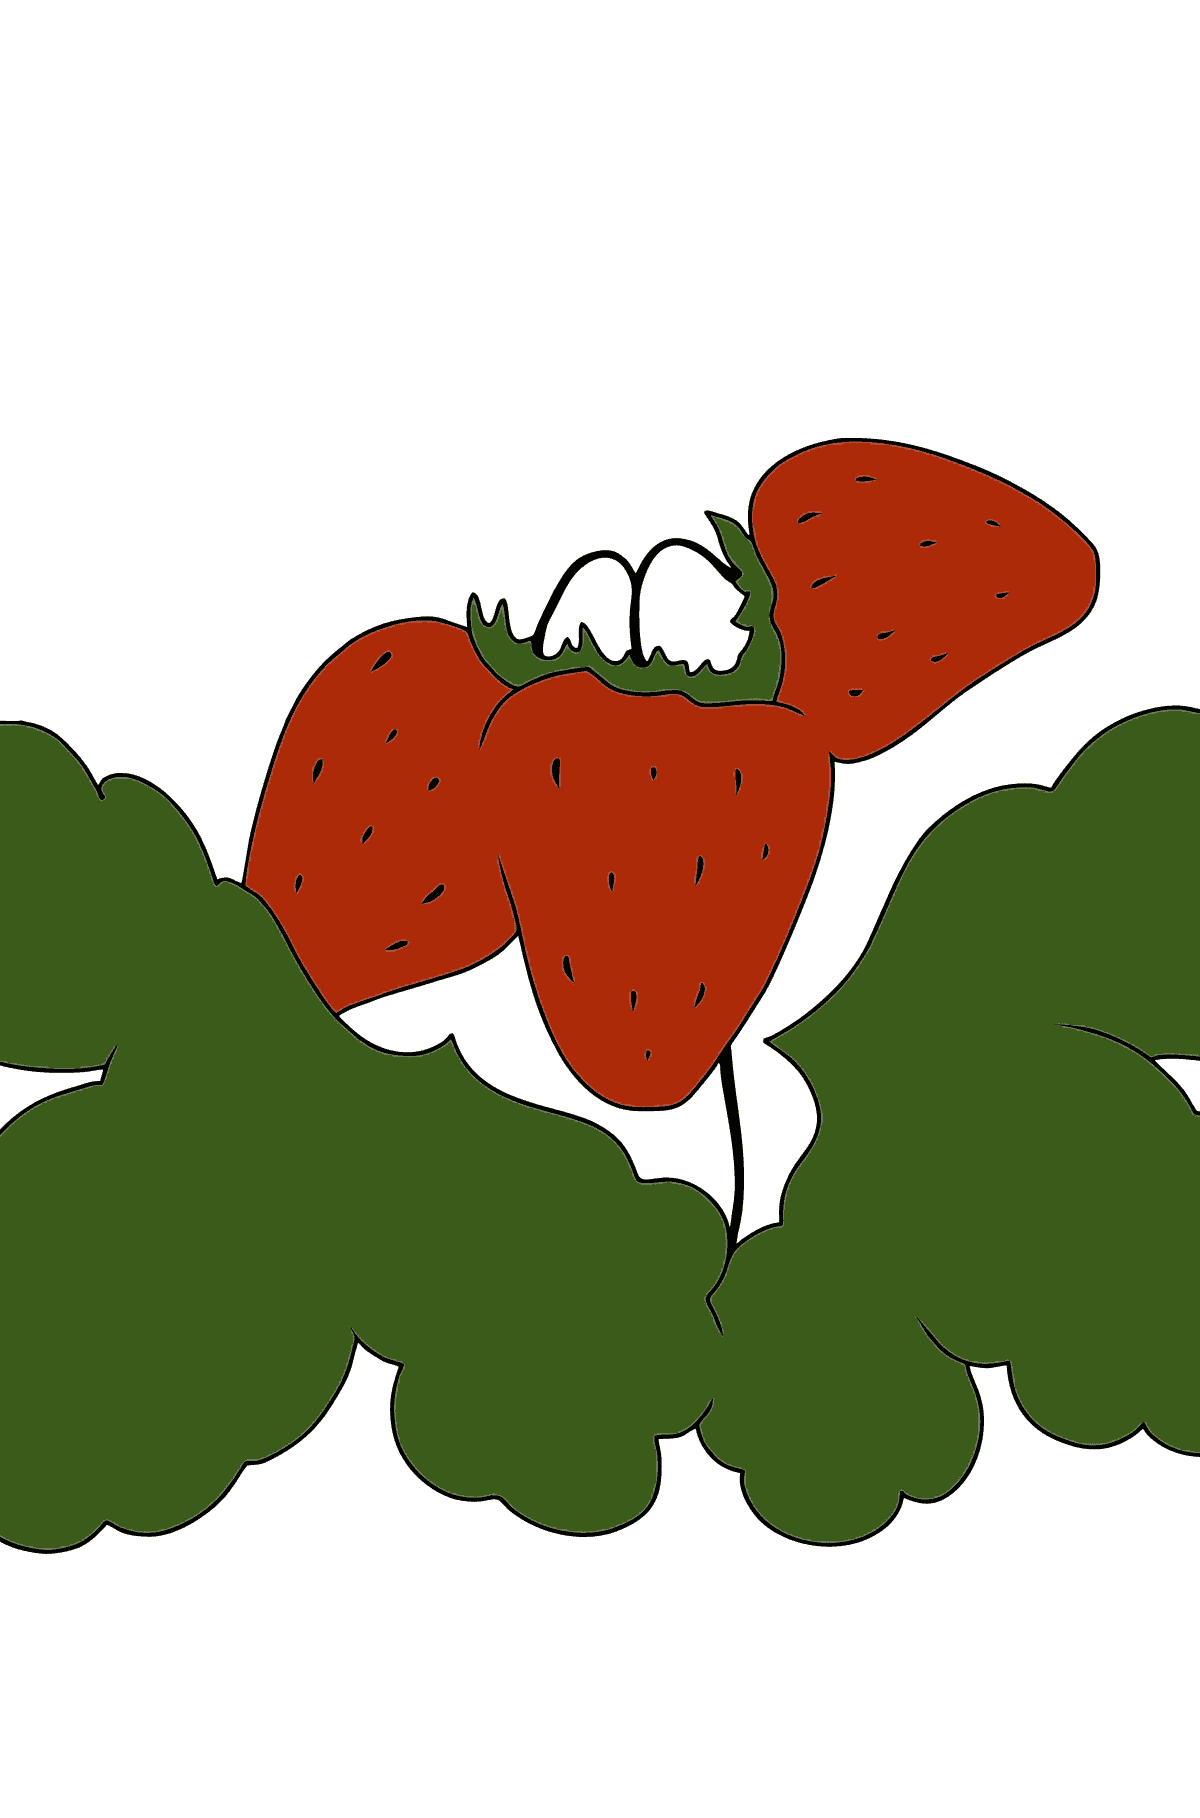 Strawberry coloring page for toddlers - Coloring Pages for Kids